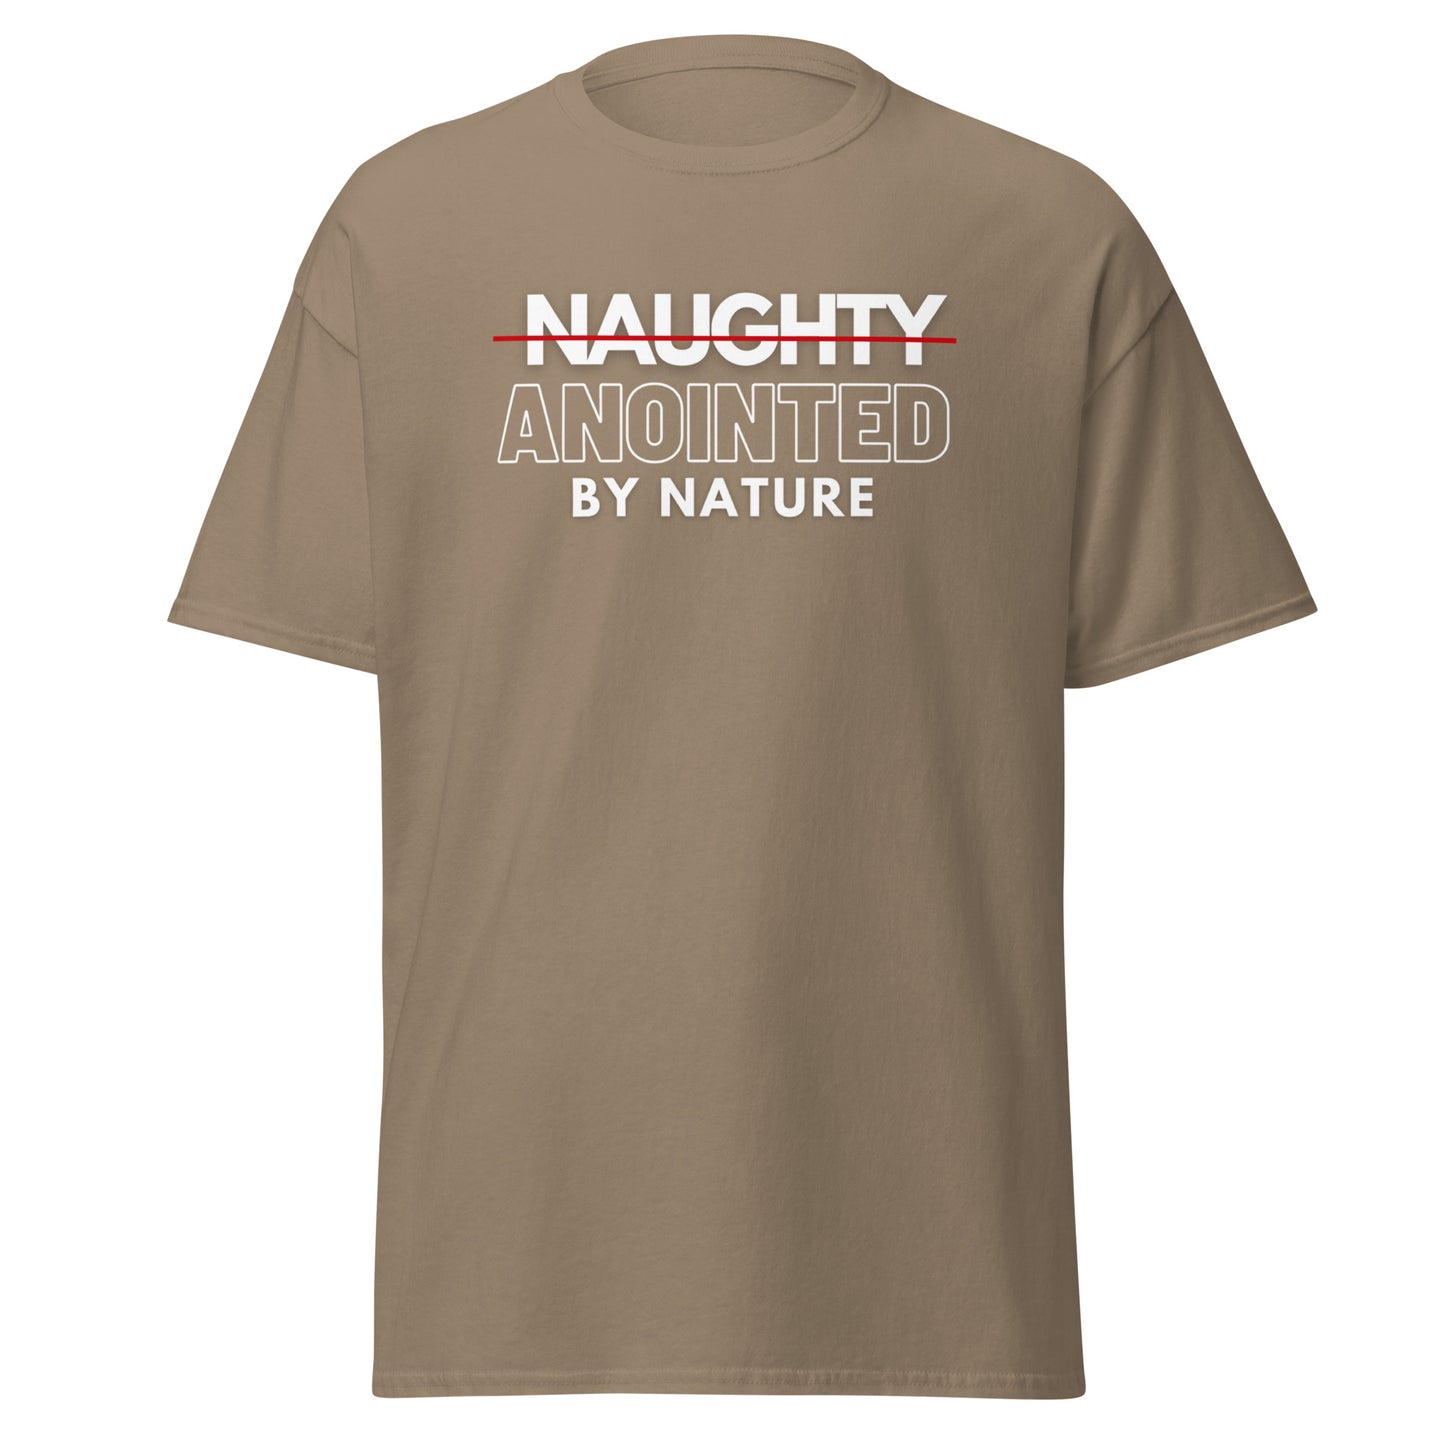 Anointed by Nature Unisex tee